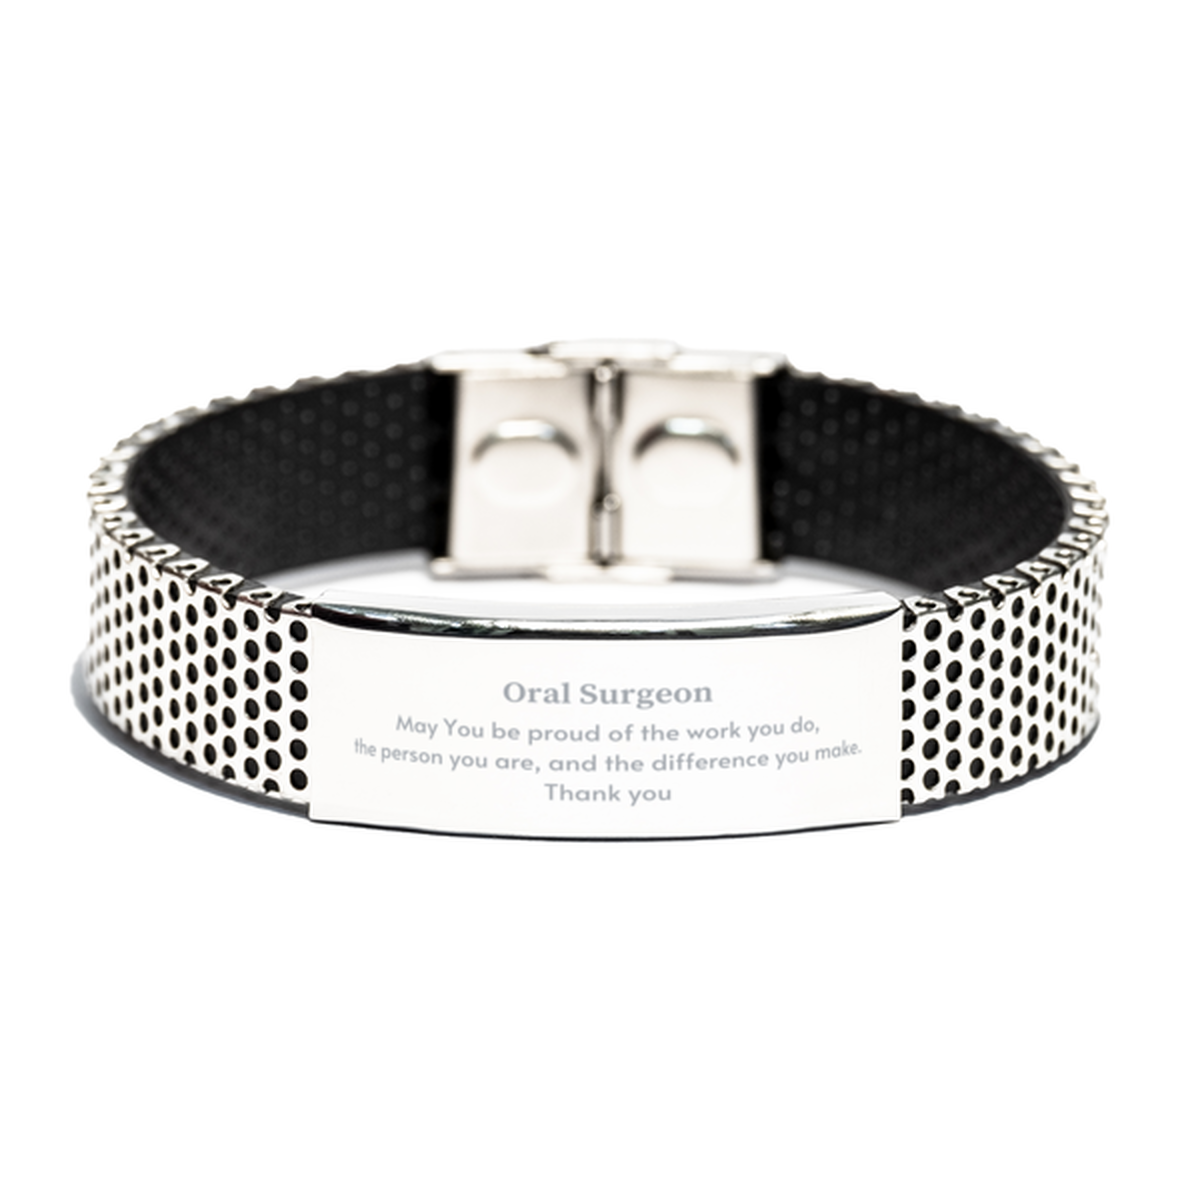 Heartwarming Stainless Steel Bracelet Retirement Coworkers Gifts for Oral Surgeon, Oral Surgeon May You be proud of the work you do, the person you are Gifts for Boss Men Women Friends